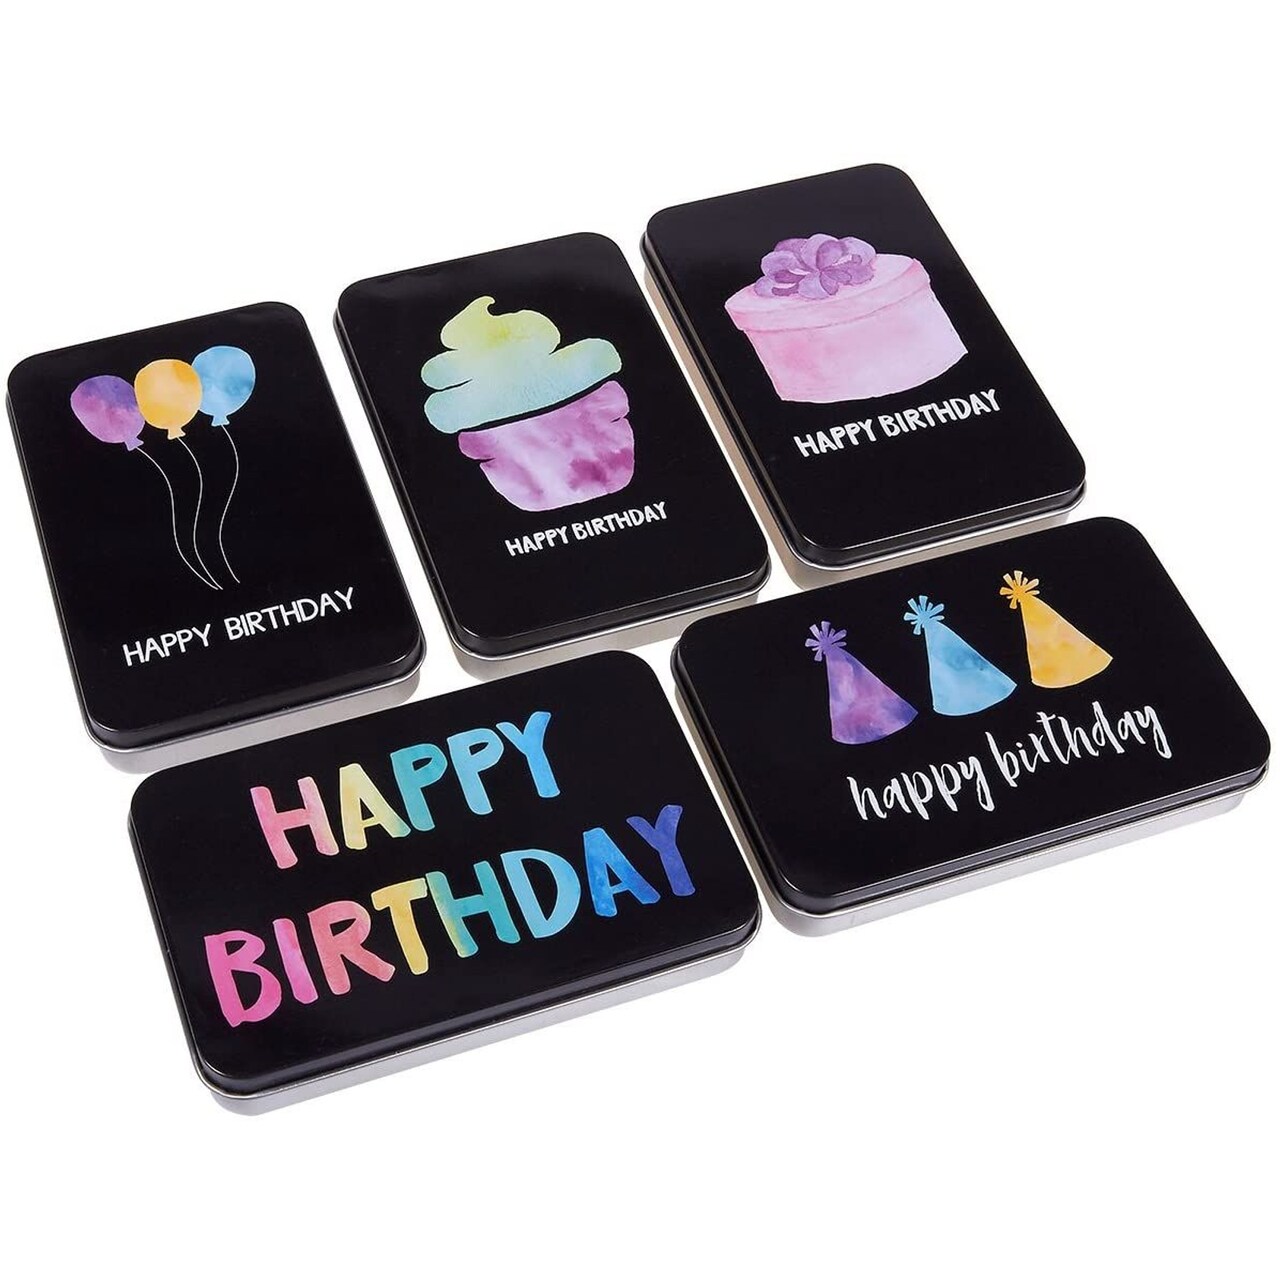 Small Tin Containers for Gift Cards, Happy Birthday Boxes (5 Pack)